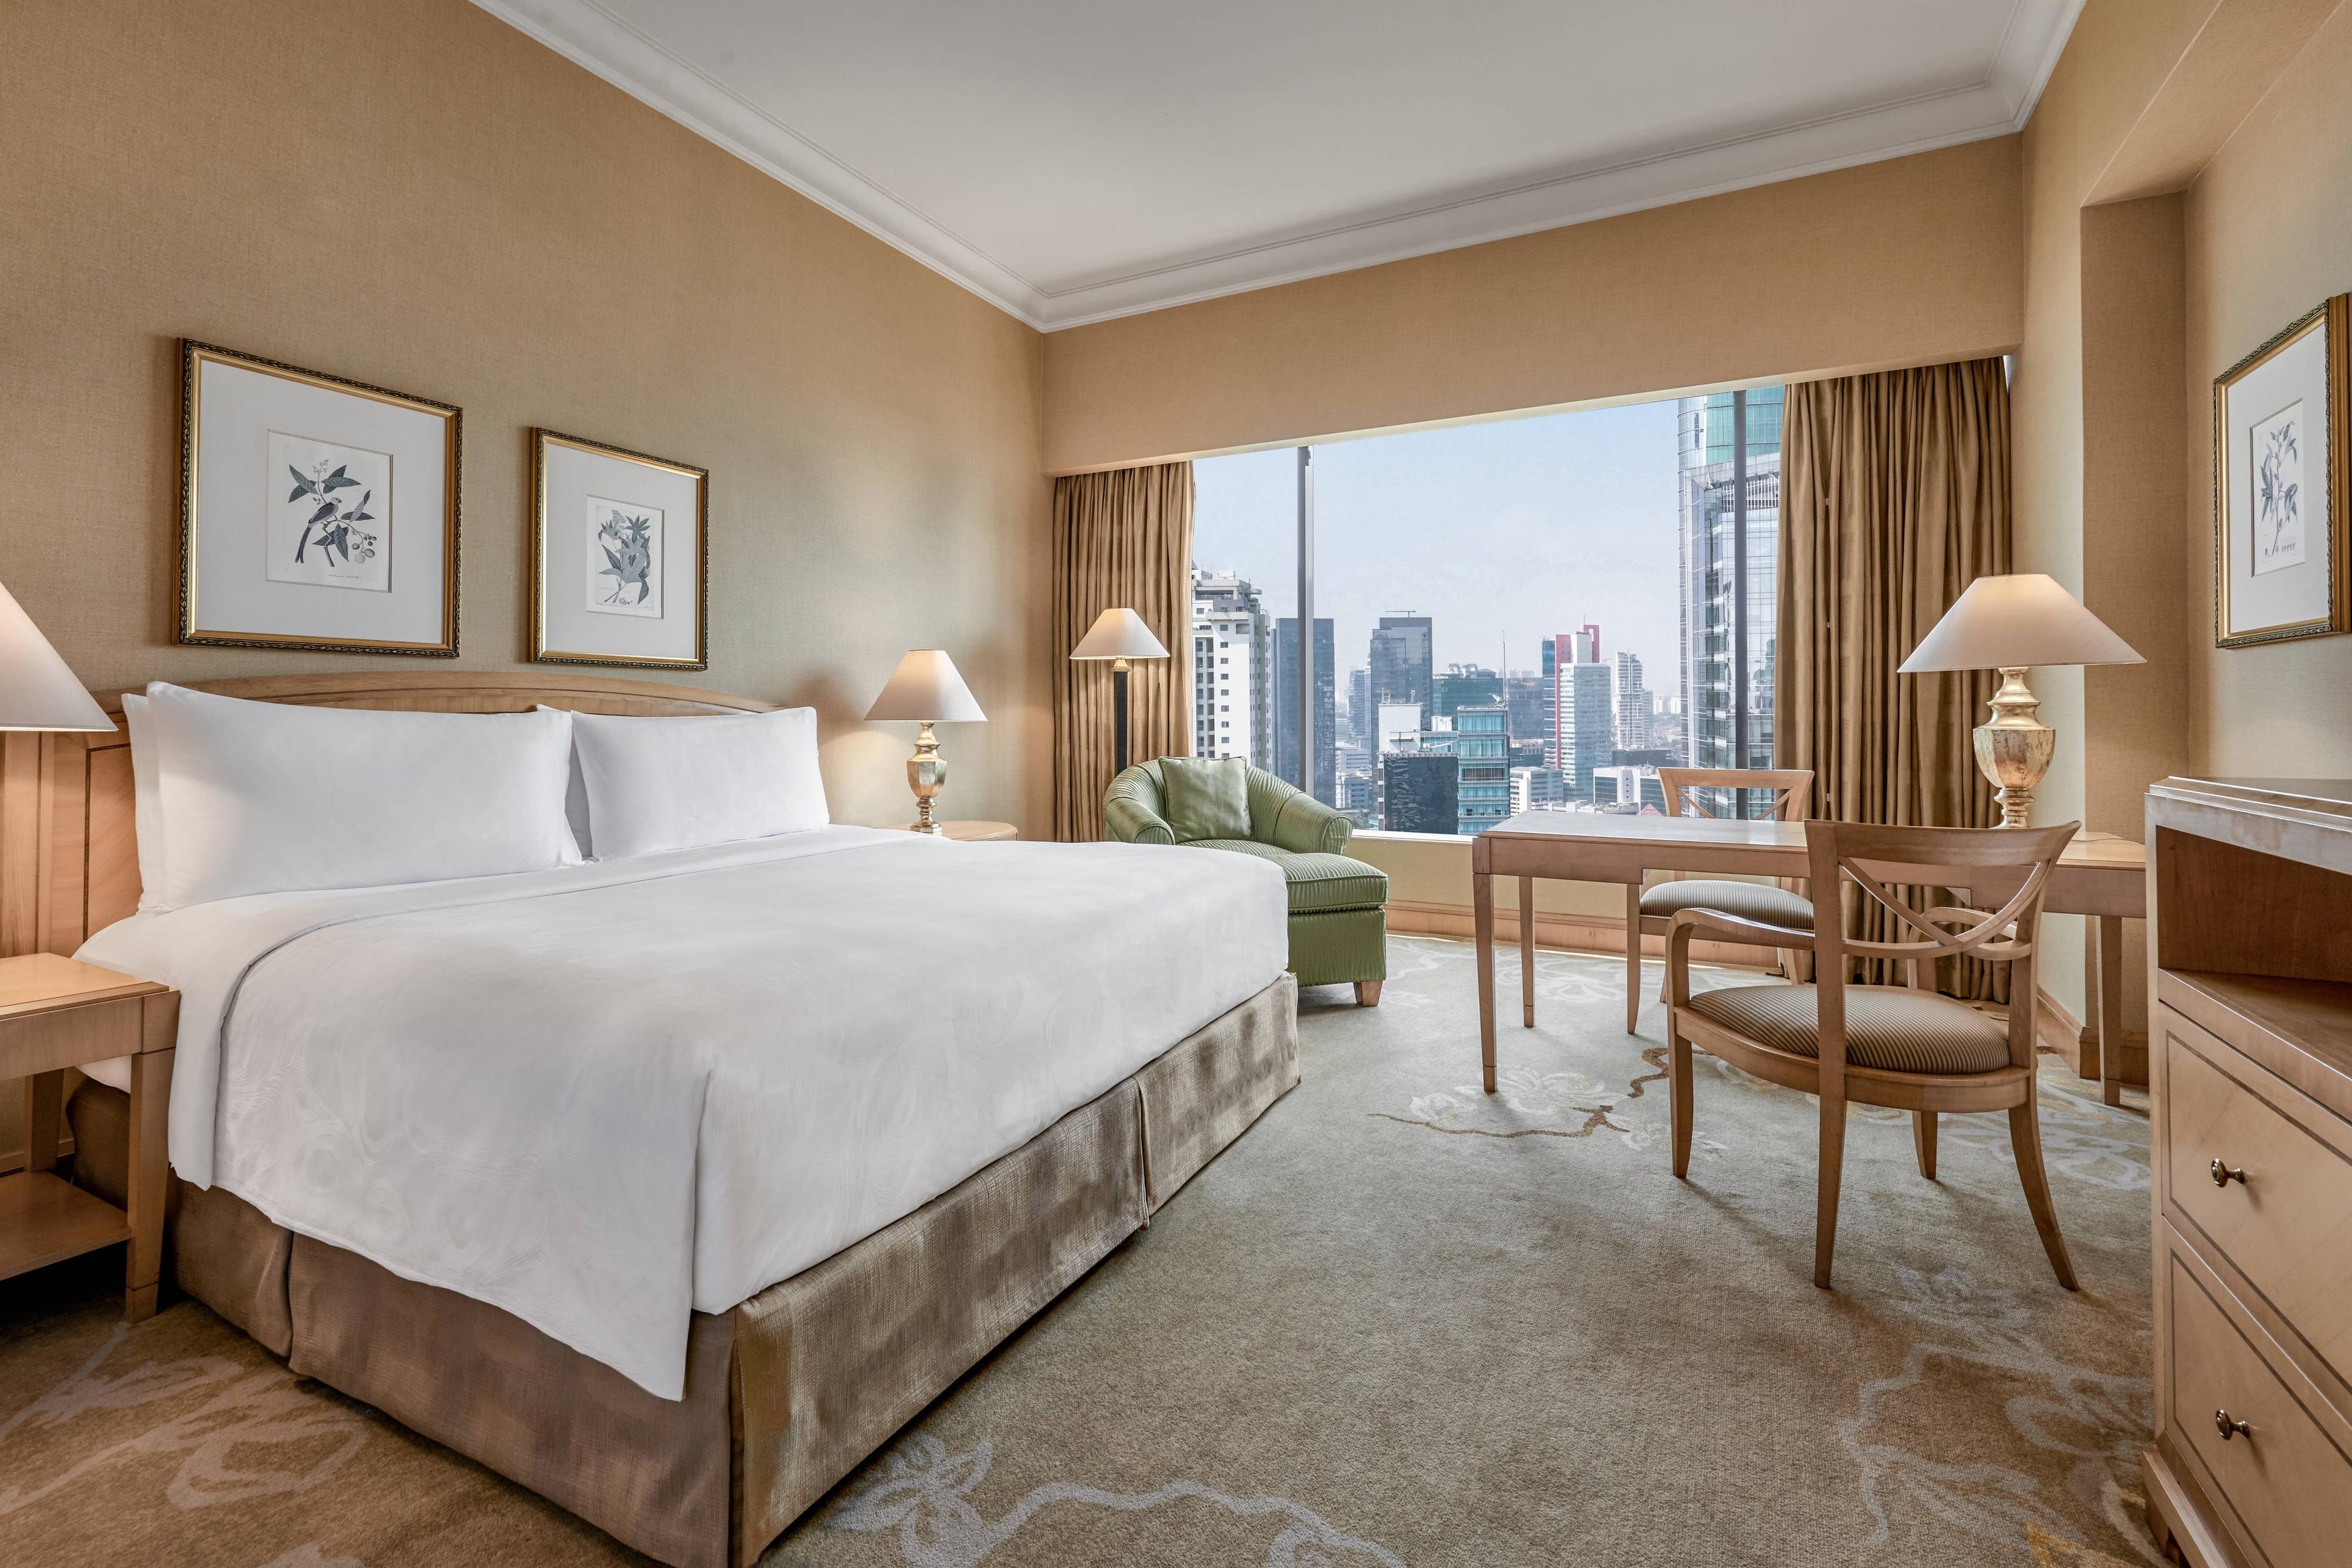 Our comfortable Deluxe Guest Rooms feature one king-size bed with a city view.